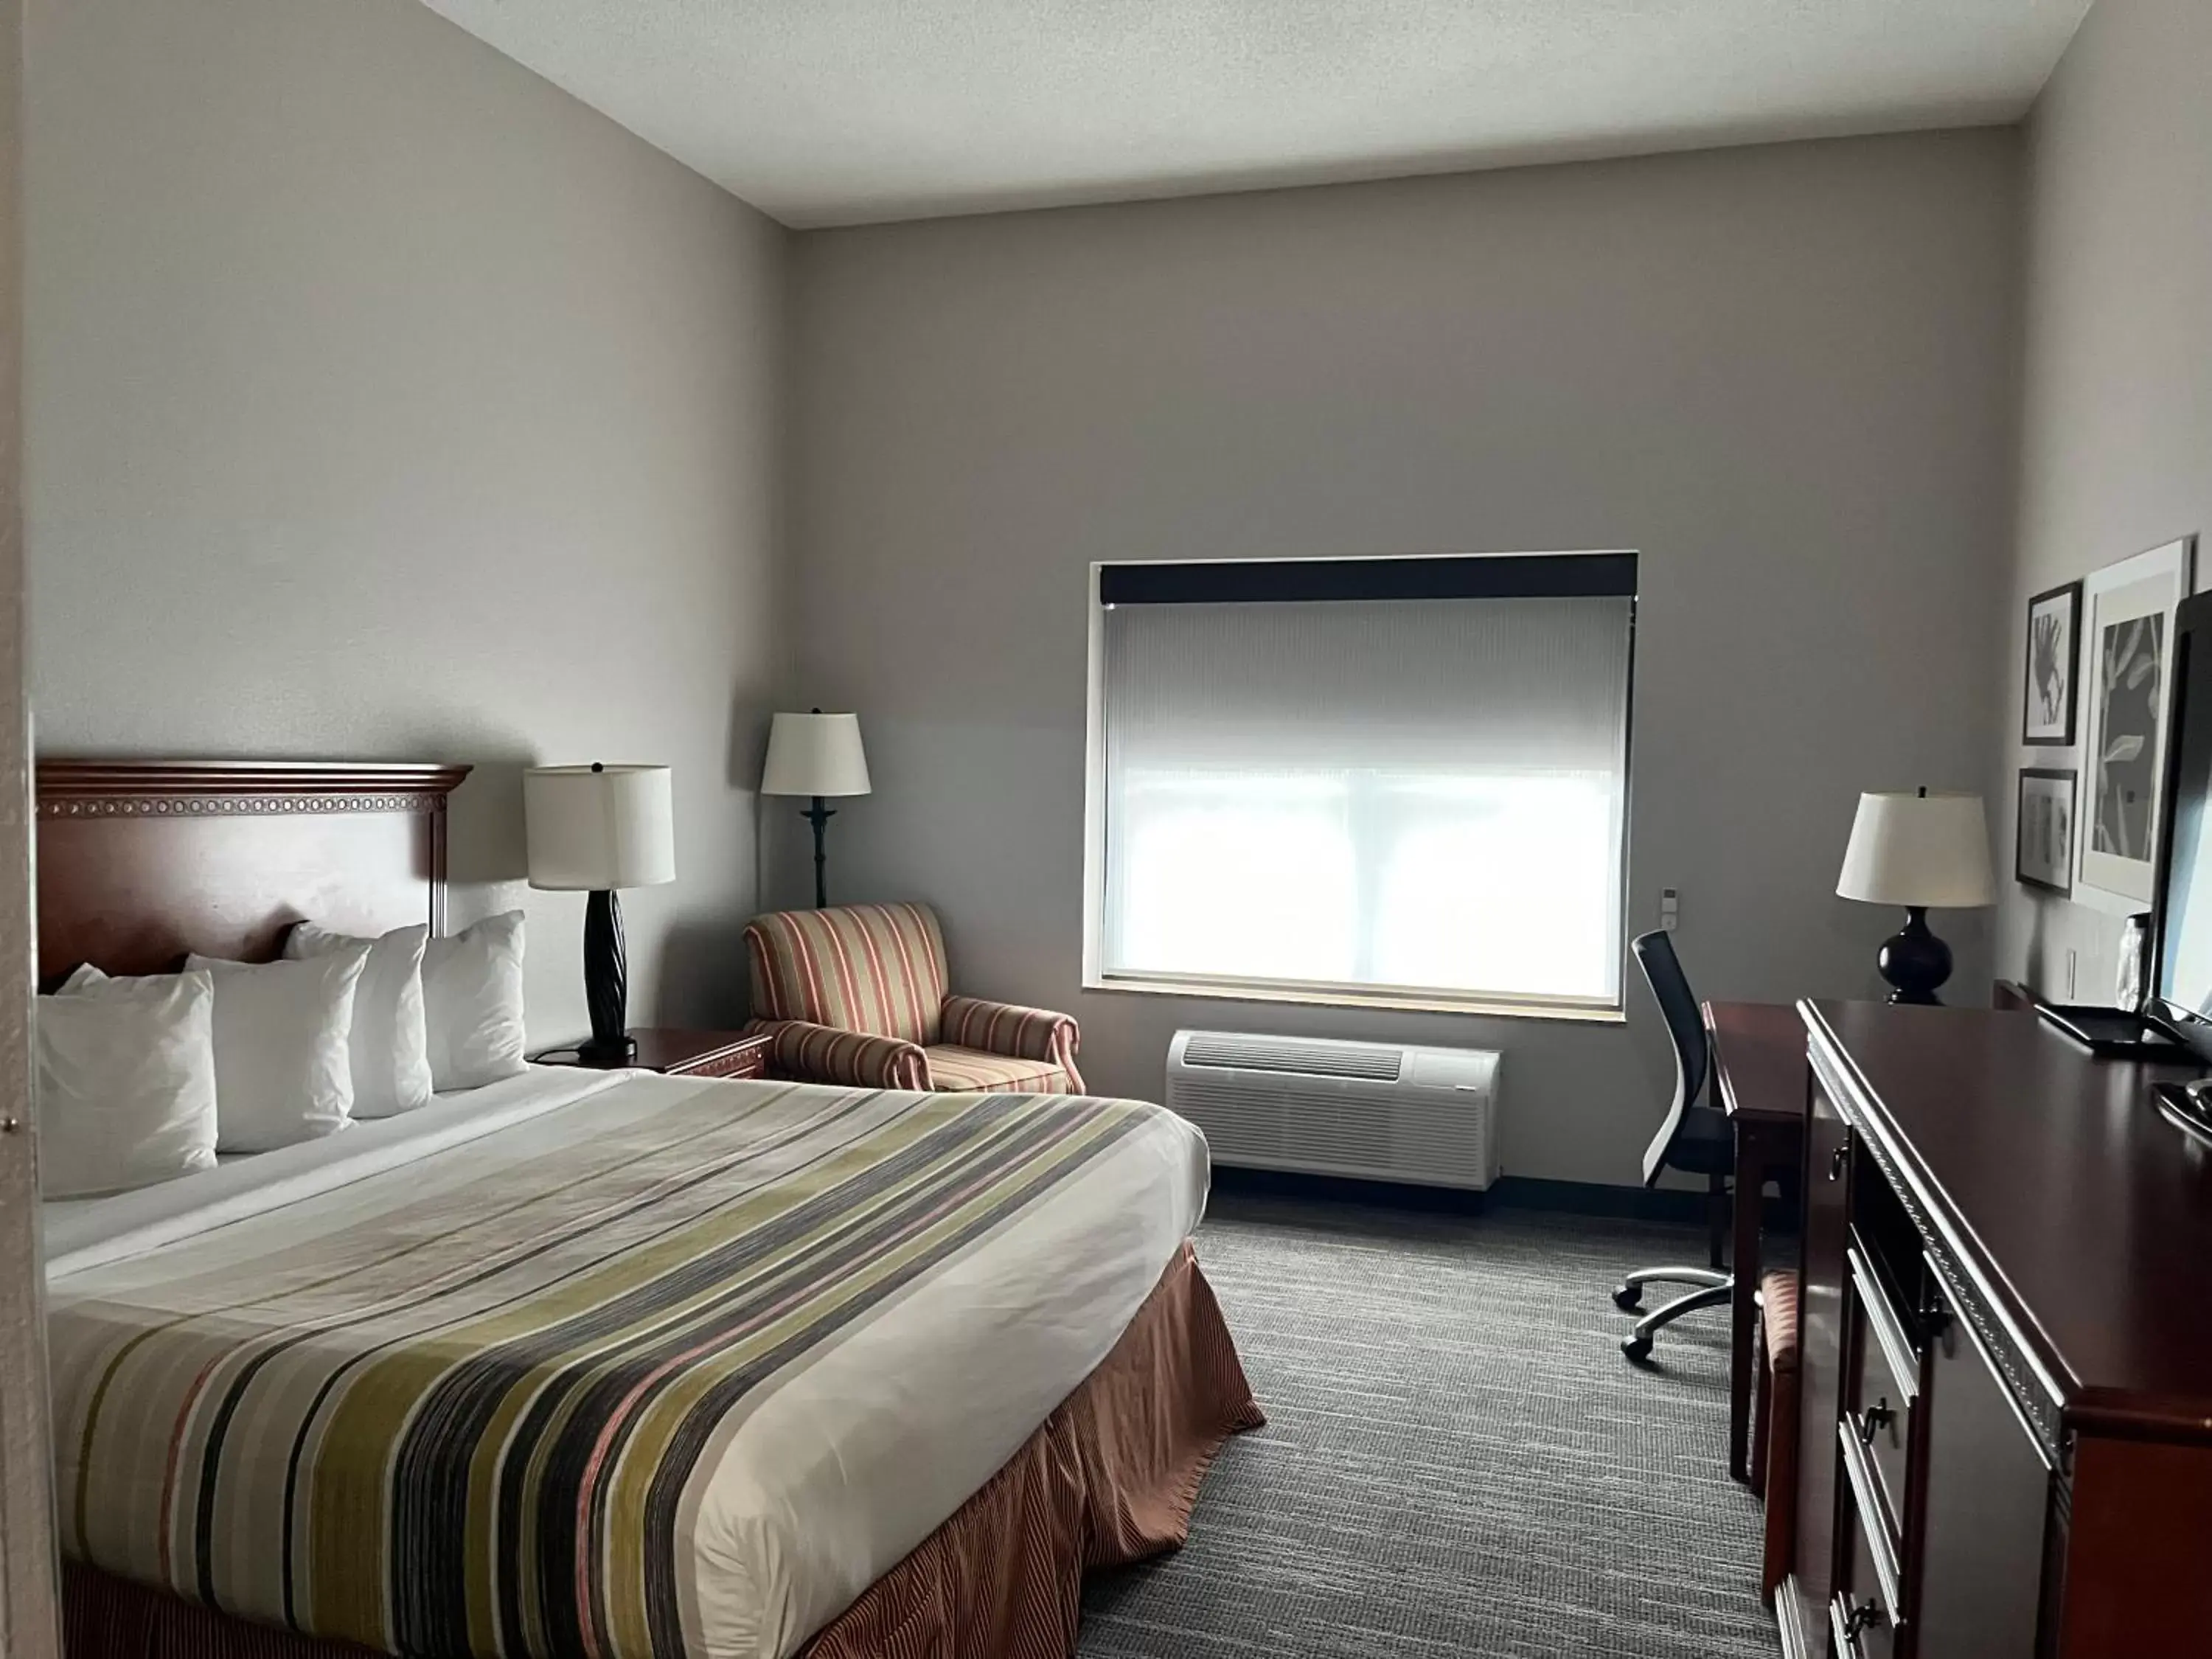 Executive King Room with Roll In Shower - Disability Access/Non-Smoking in Country Inn & Suites by Radisson, Harrisburg - Hershey-West, PA